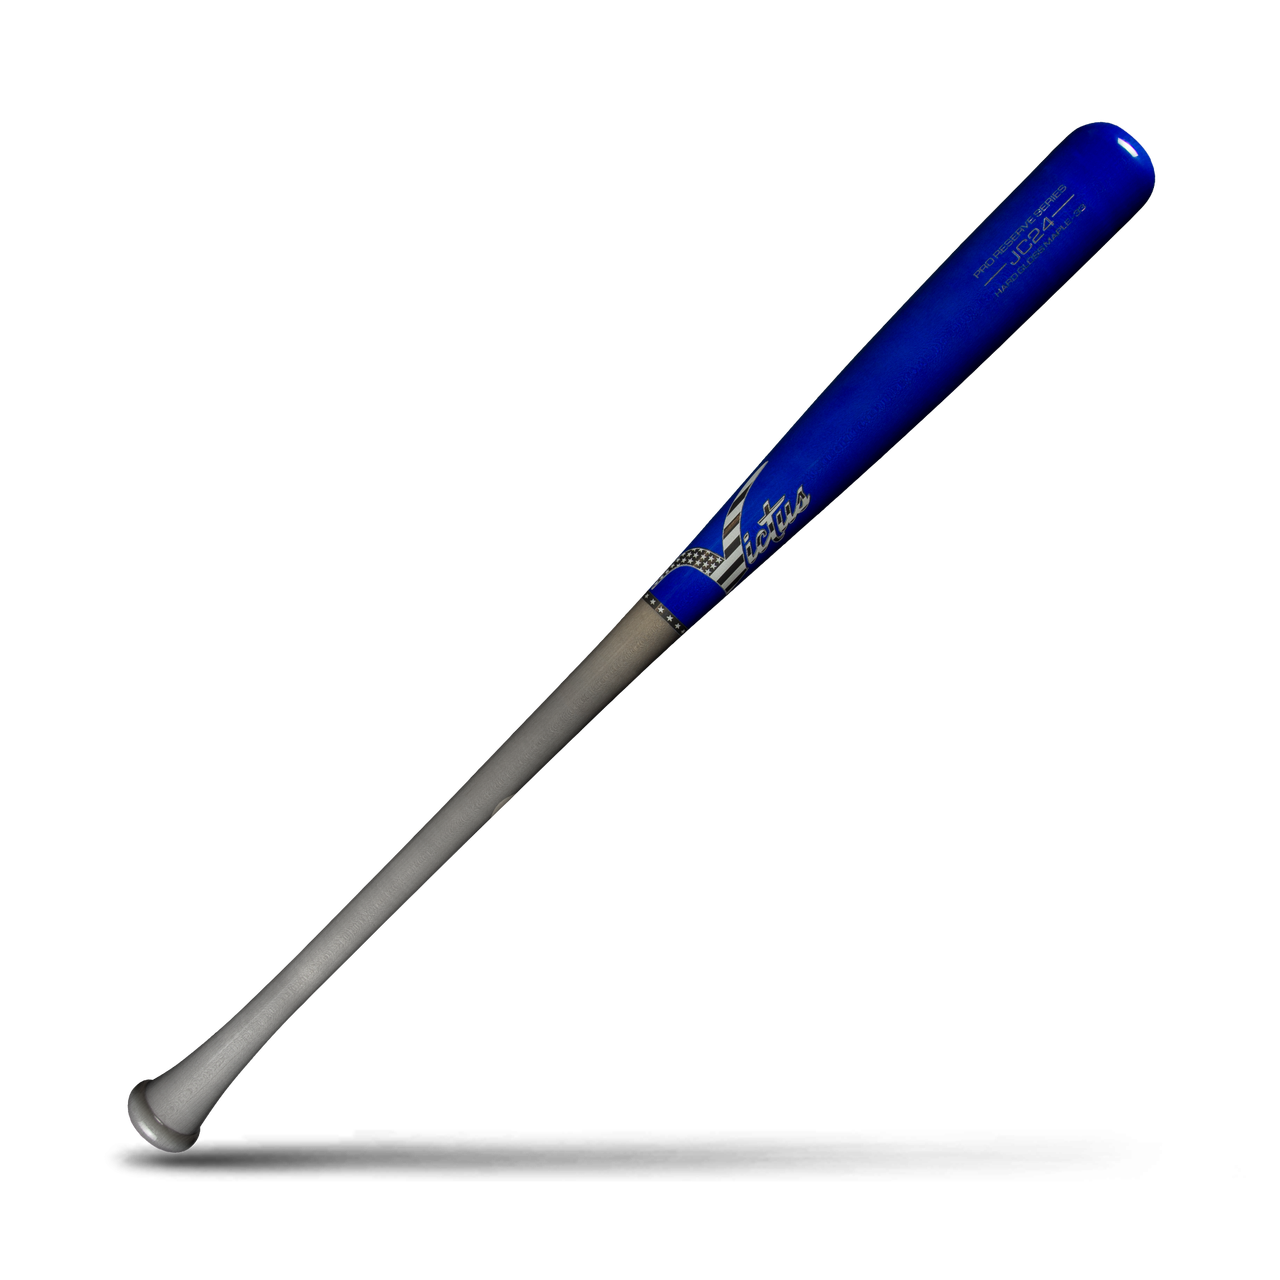 victus-jc24-maple-blue-pro-reserve-3-wood-baseball-bat-33-inch VRWMJC24-GYBL-33 Victus 819128027178 Approximate -3 Length To Weight Ratio Balanced Swing Weight Cupped End